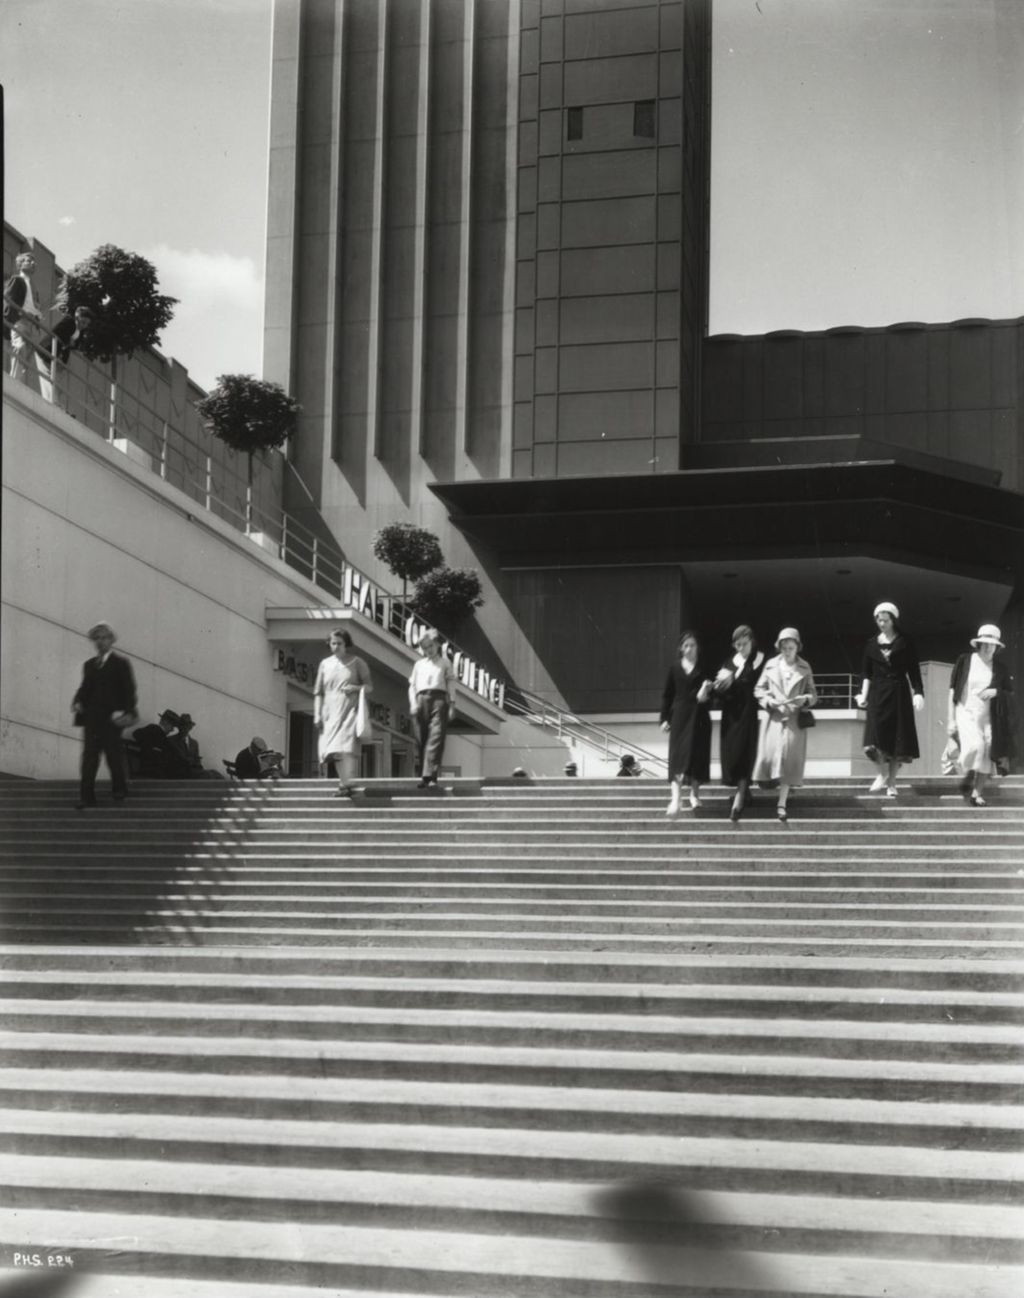 Miniature of View of the stairway leading up to the Hall of Science Tower.